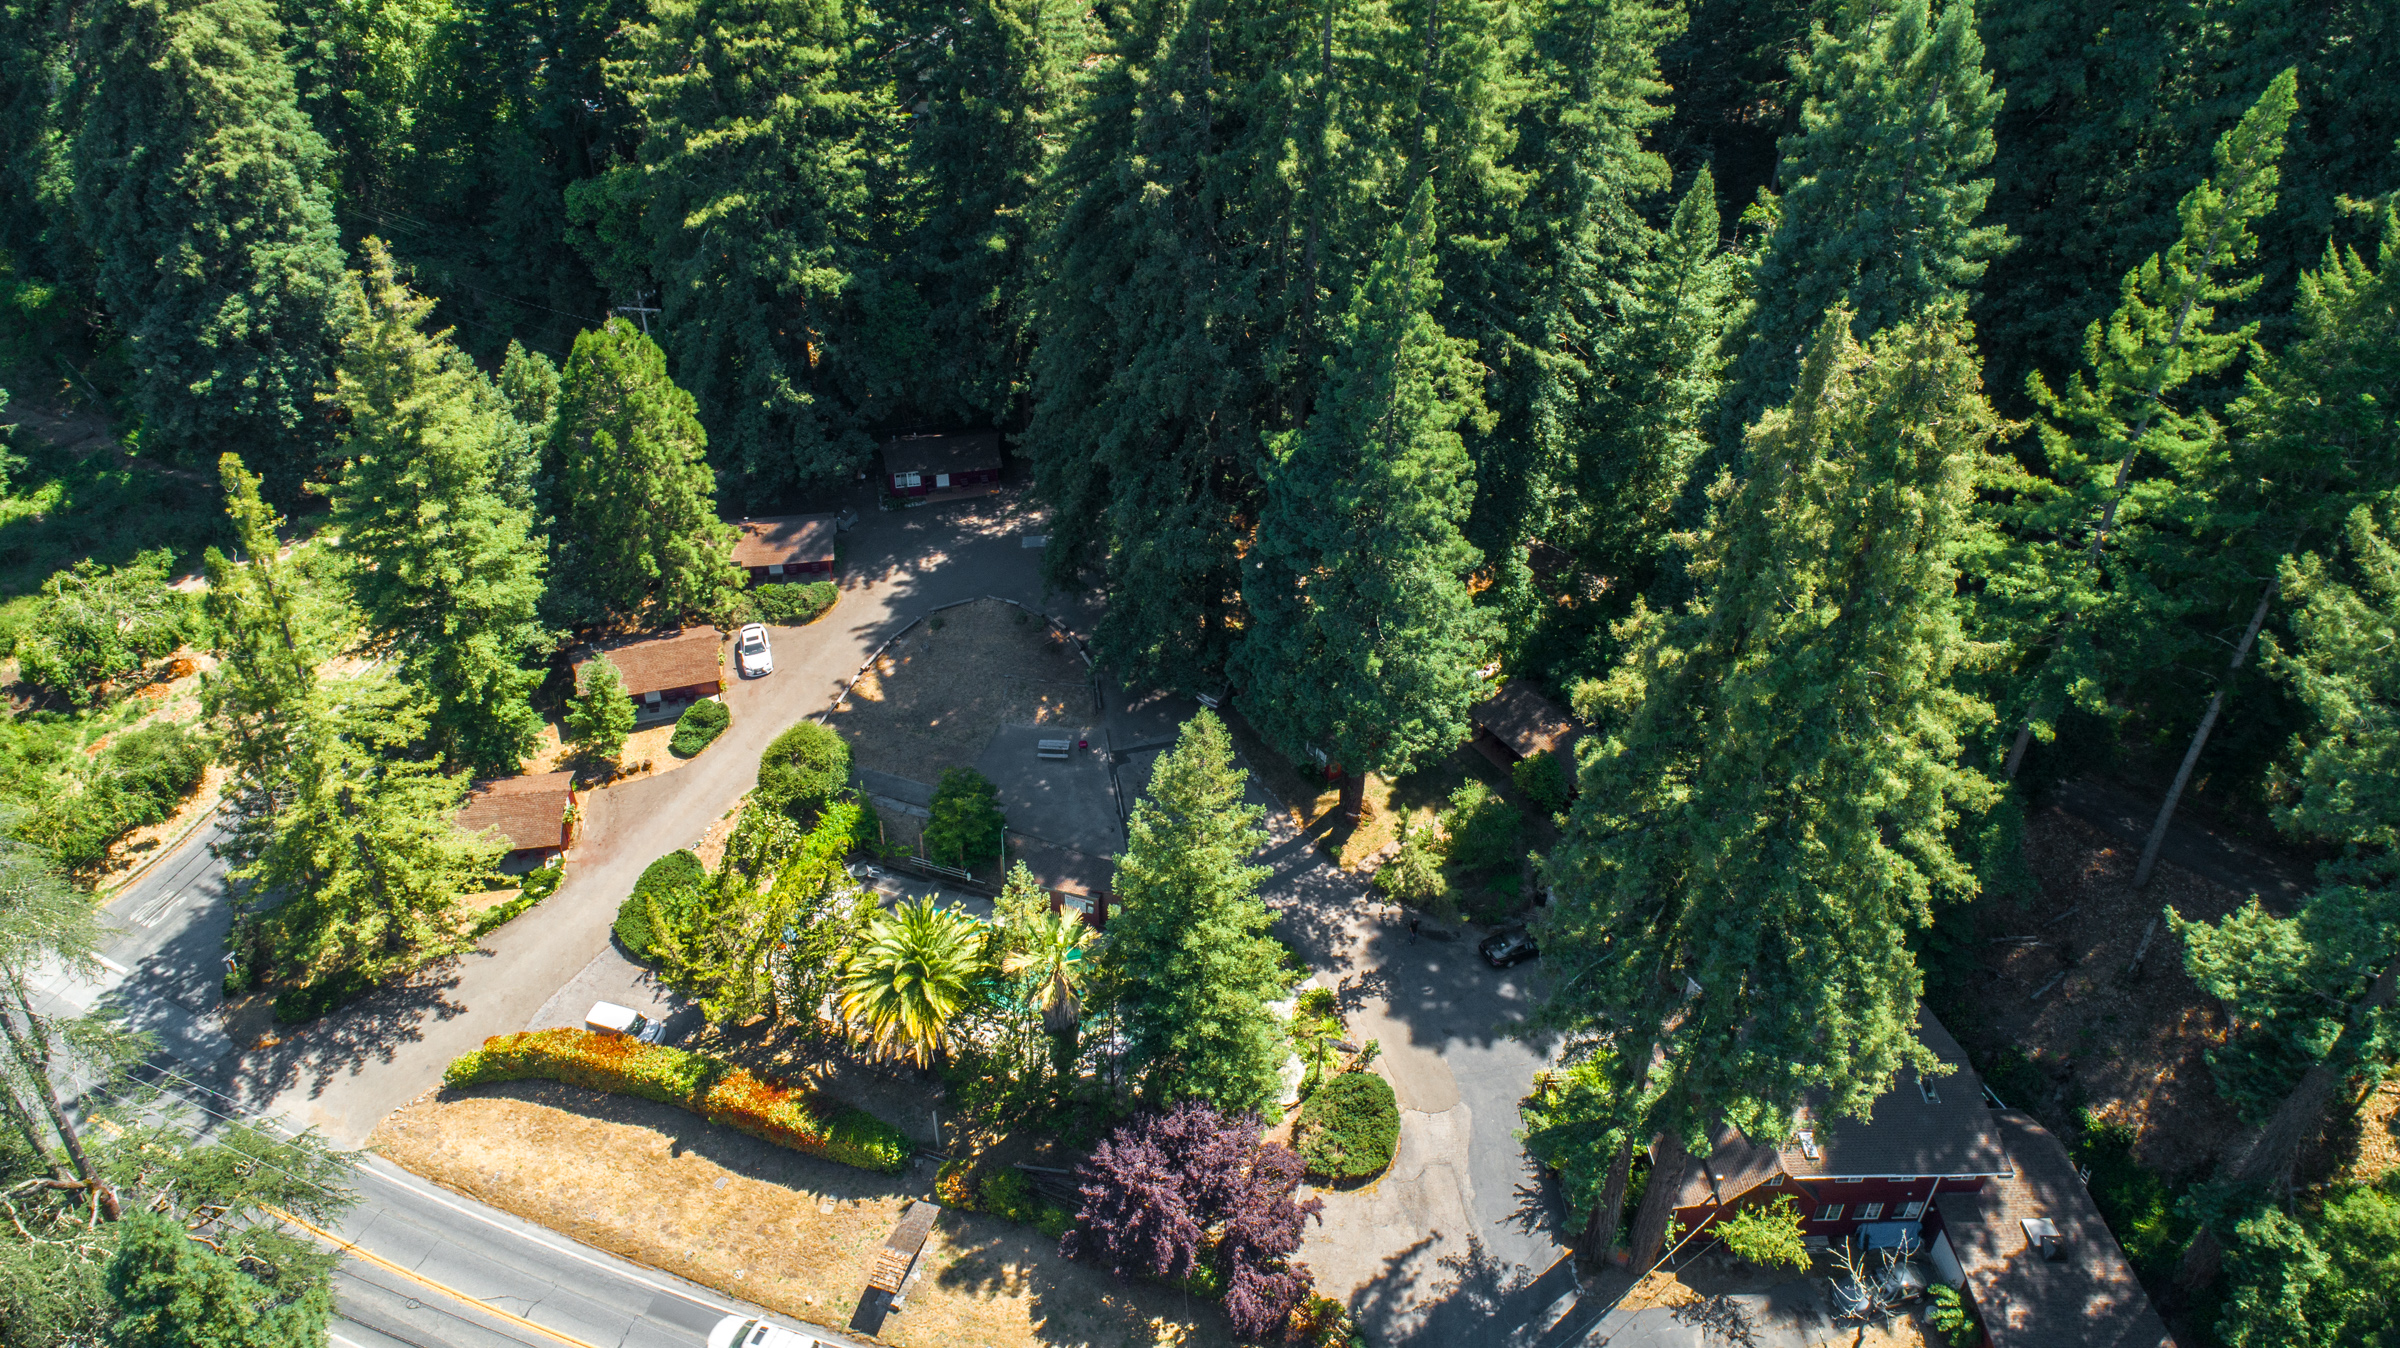 An aerial view of the former Jaye's Timberlane resort